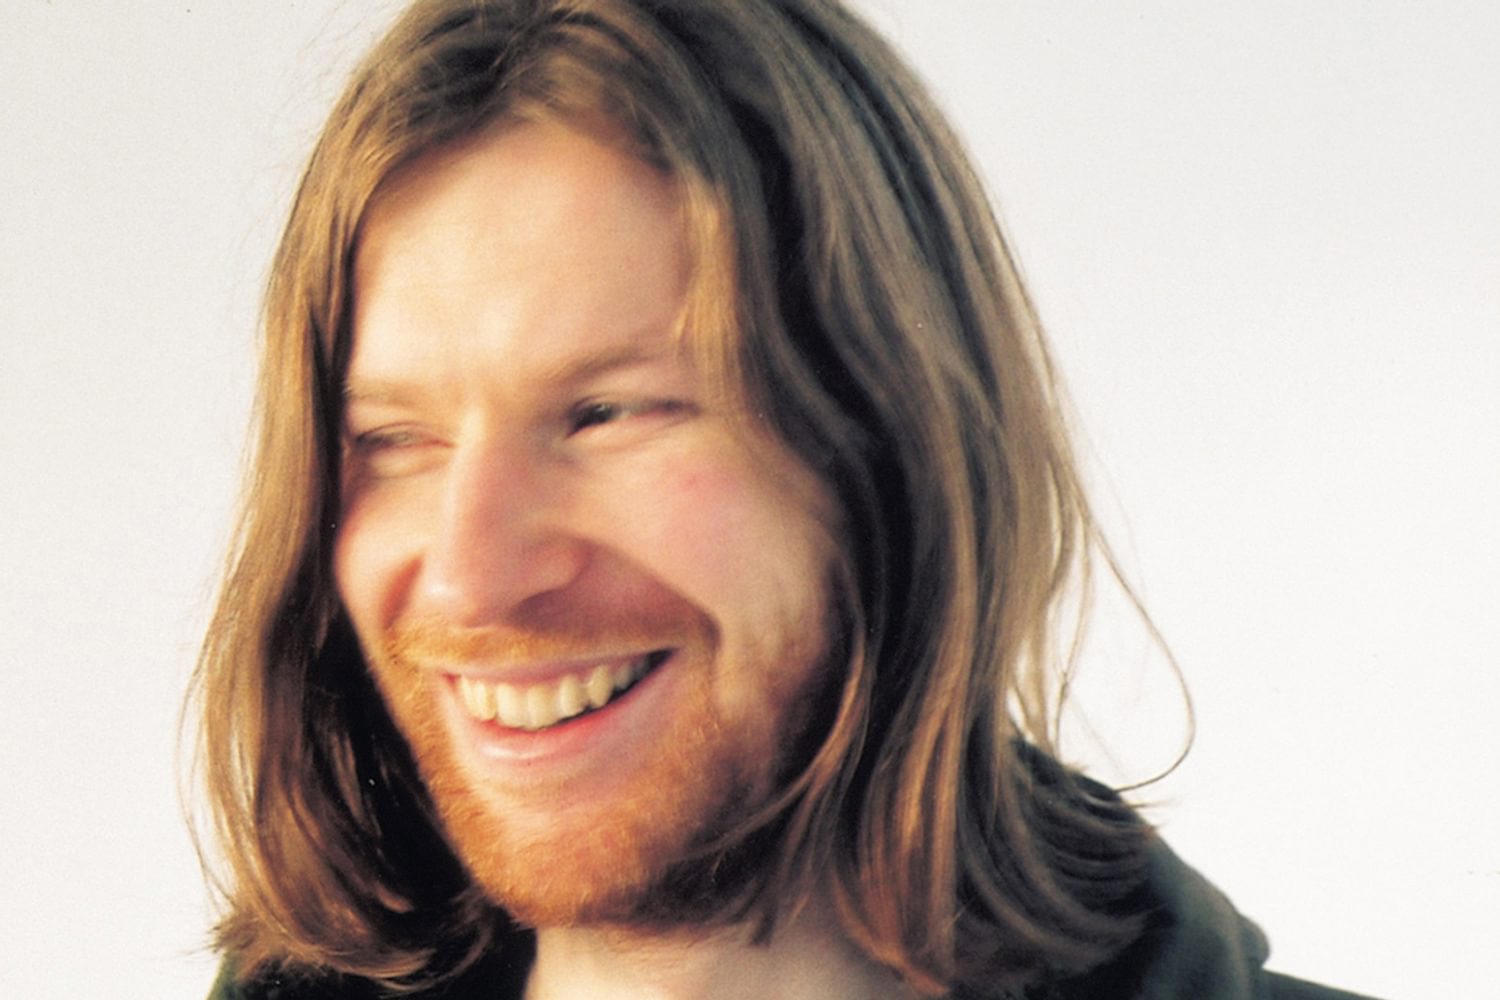 Aphex Twin shares music from his six-year old son